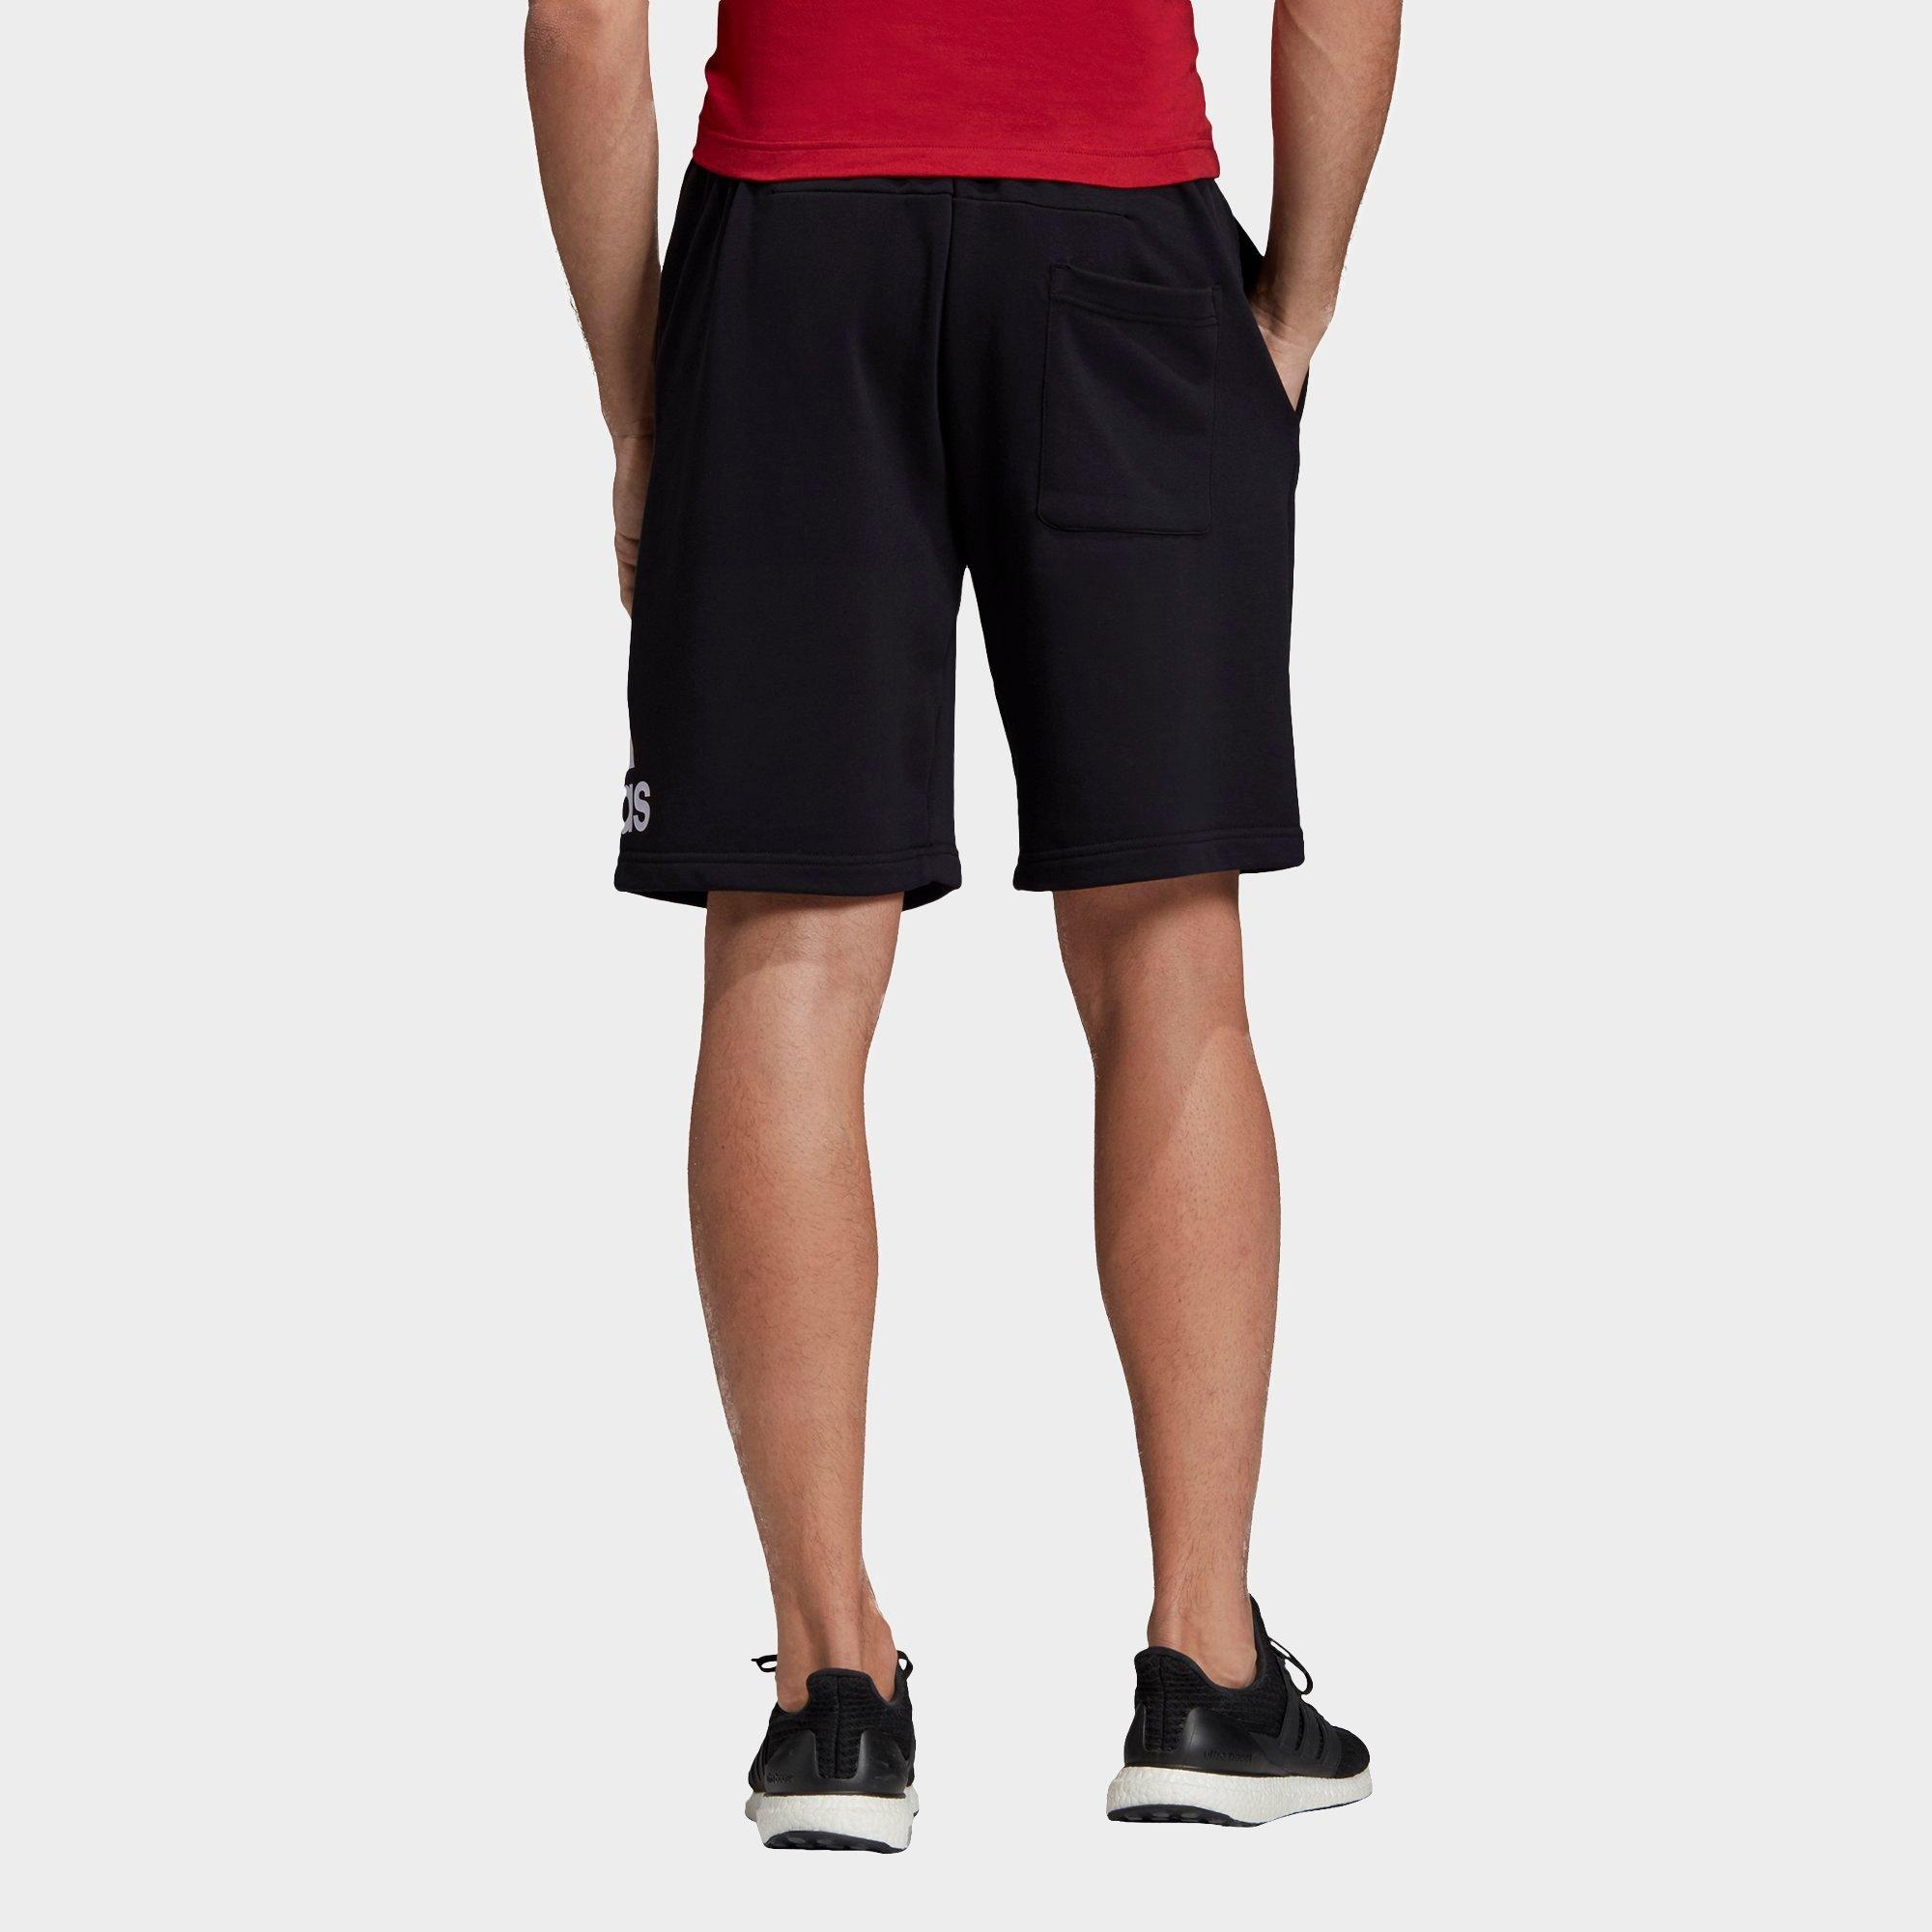 adidas must haves badge of sport shorts